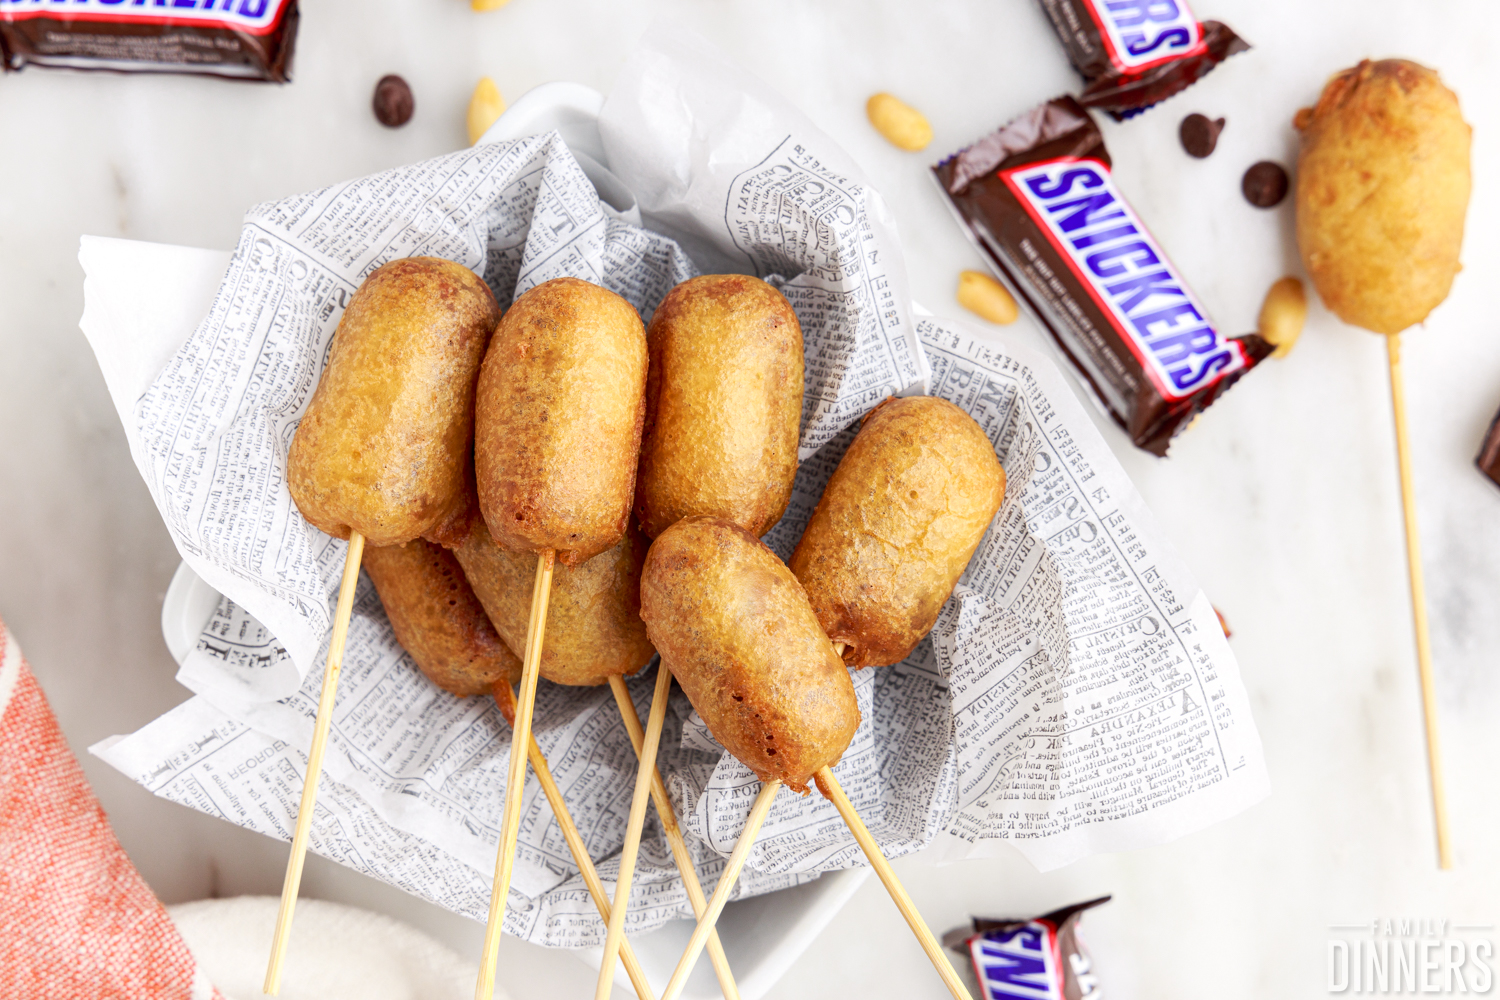 pile of deep fried snickers on a piece of paper, one deep fried snickers sitting on the counter nest to them, some fun-sized snickers bars scattered around them